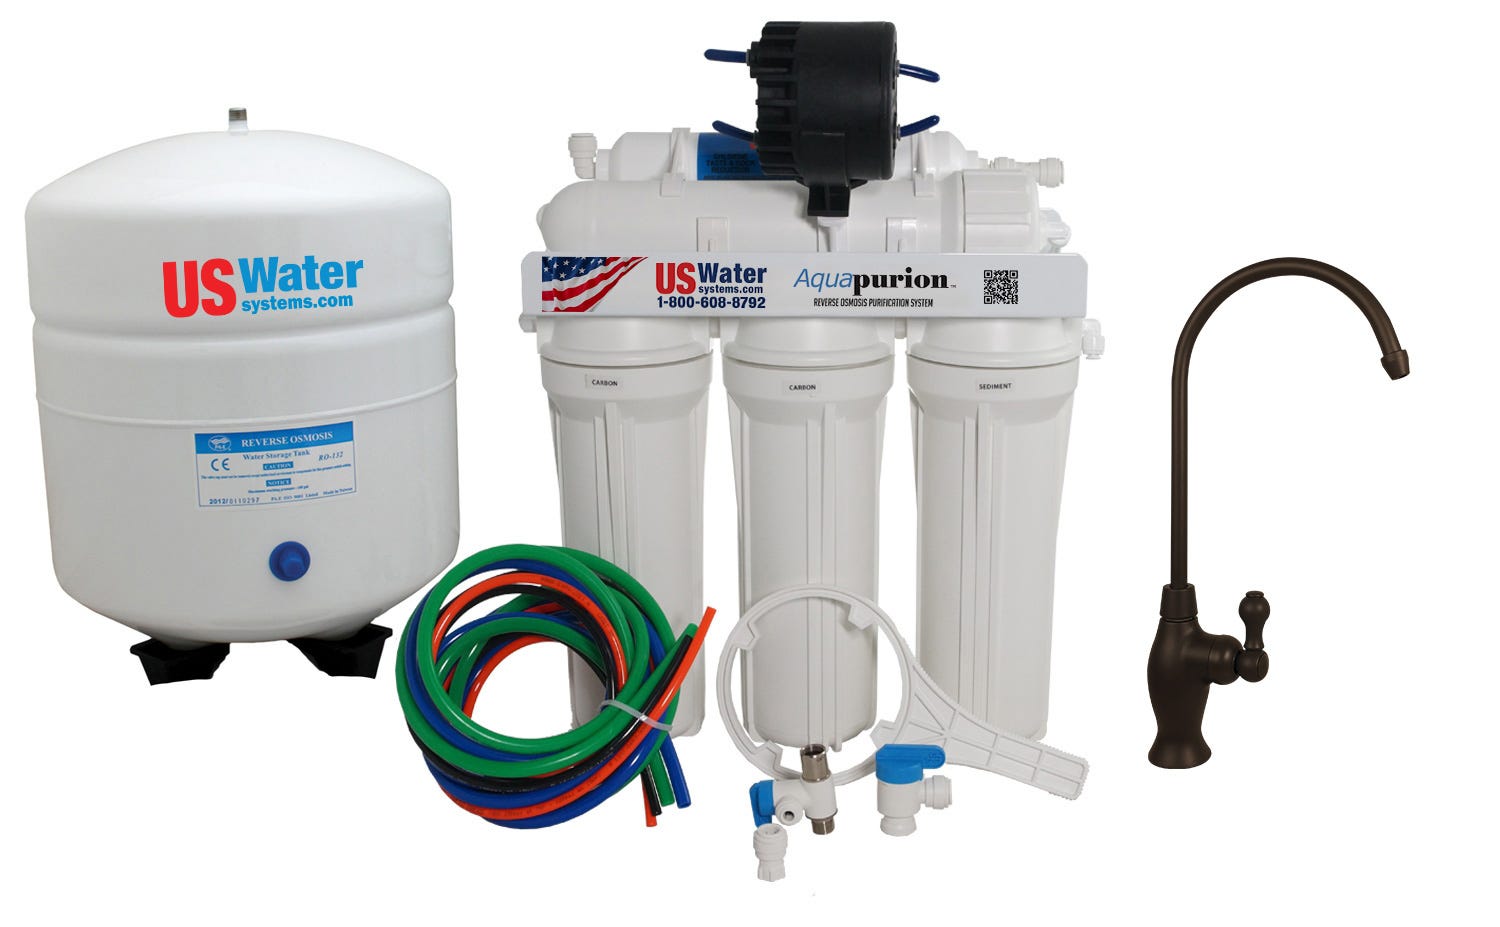 US Water Aquapurion 5-Stage Reverse Osmosis System With Enhanced Nitrate Removal